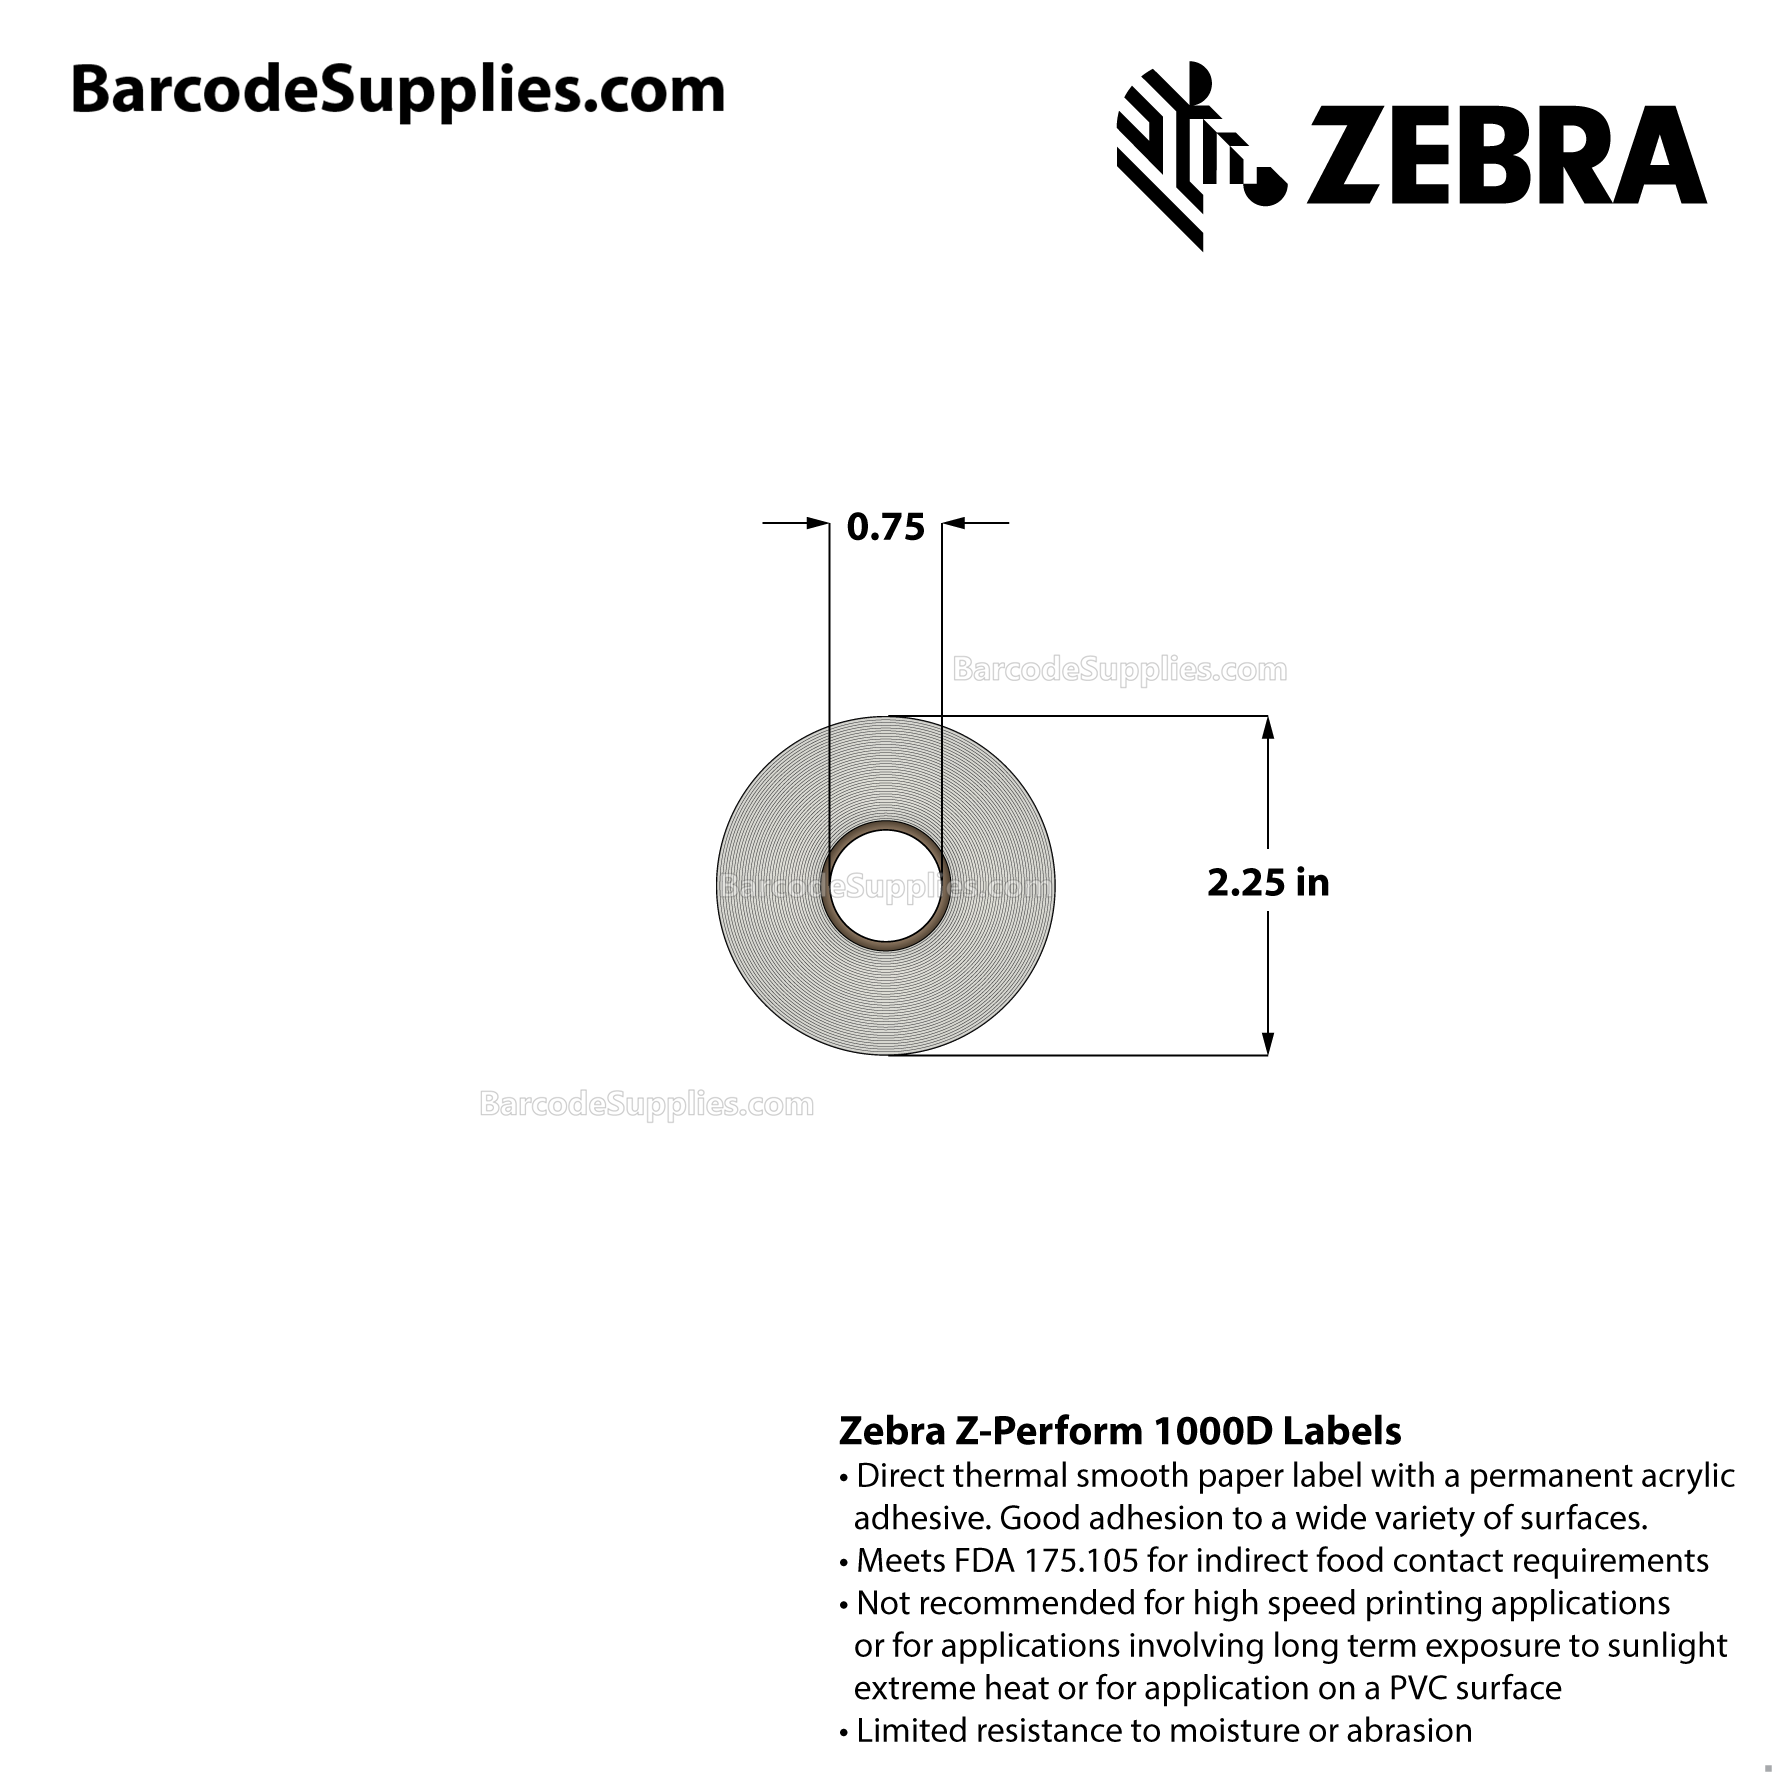 3 x 1 Direct Thermal White Z-Perform 1000D Labels With Permanent Adhesive - Perforated - 430 Labels Per Roll - Carton Of 36 Rolls - 15480 Labels Total - MPN: 10026369